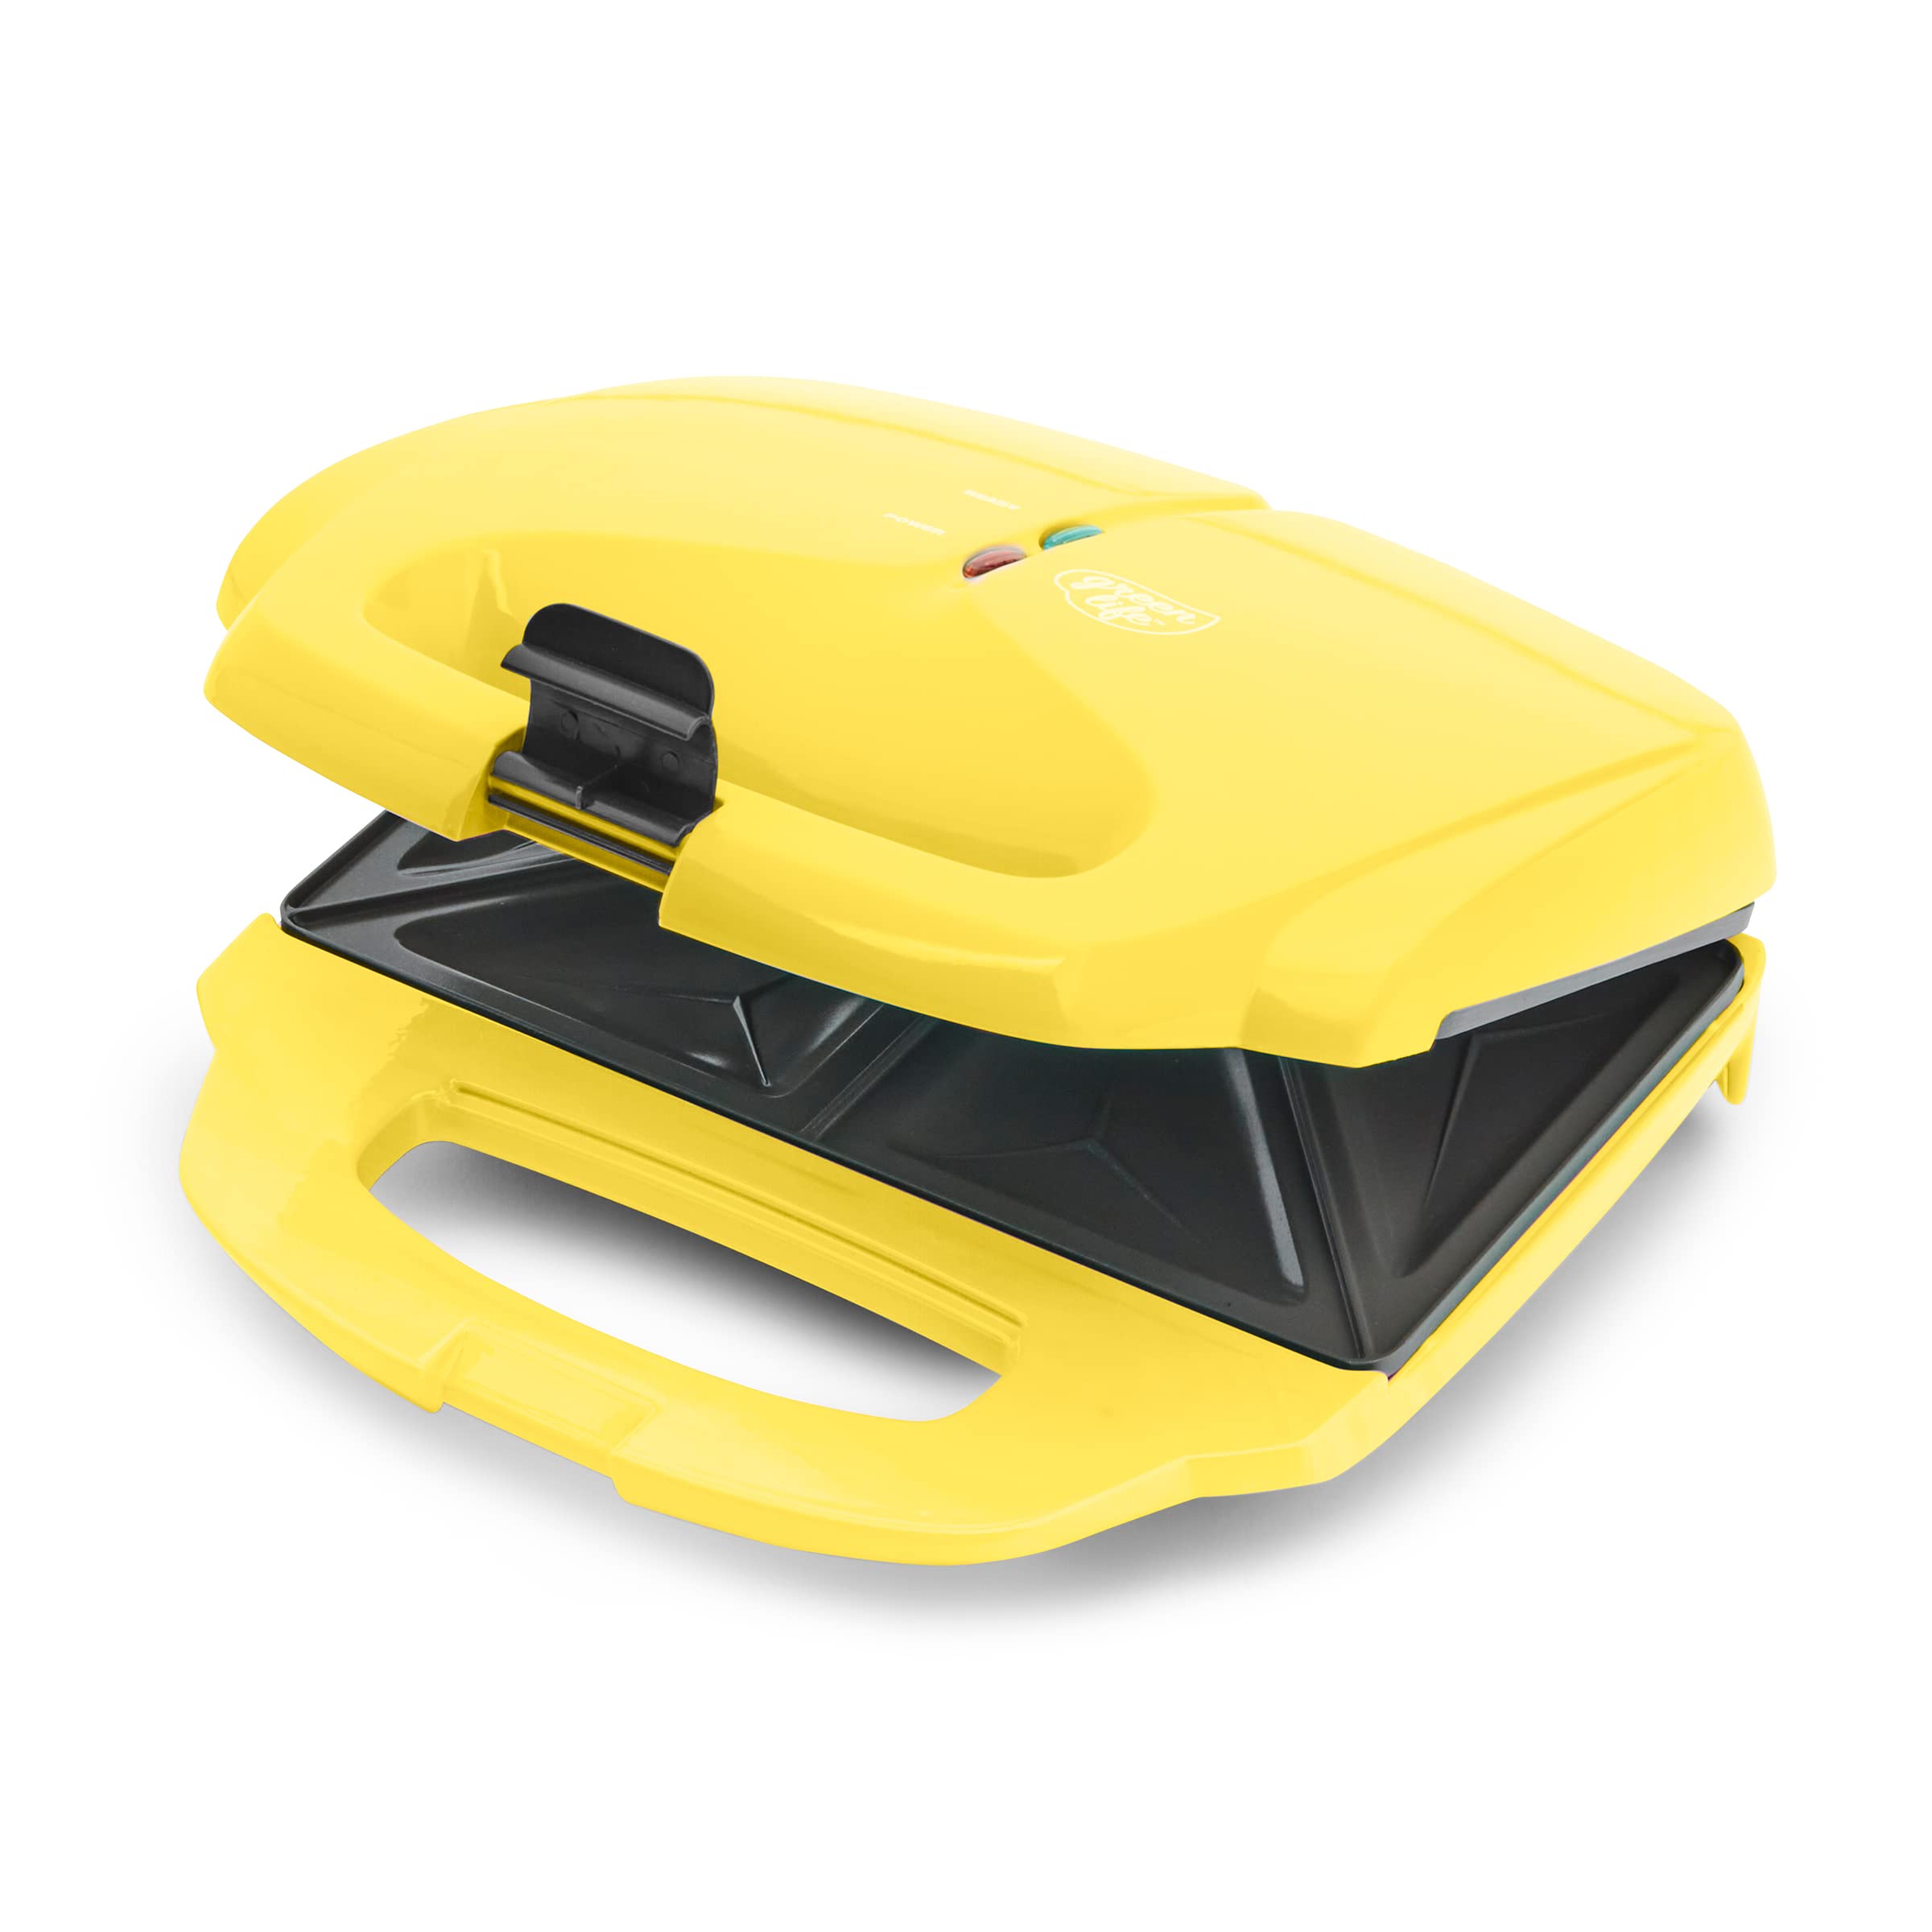 Image of GreenLife Pro Electric Panini Press Grill and Sandwich Maker, Healthy Ceramic Nonstick Plates, Easy Indicator Light, PFAS-Free, Yellow